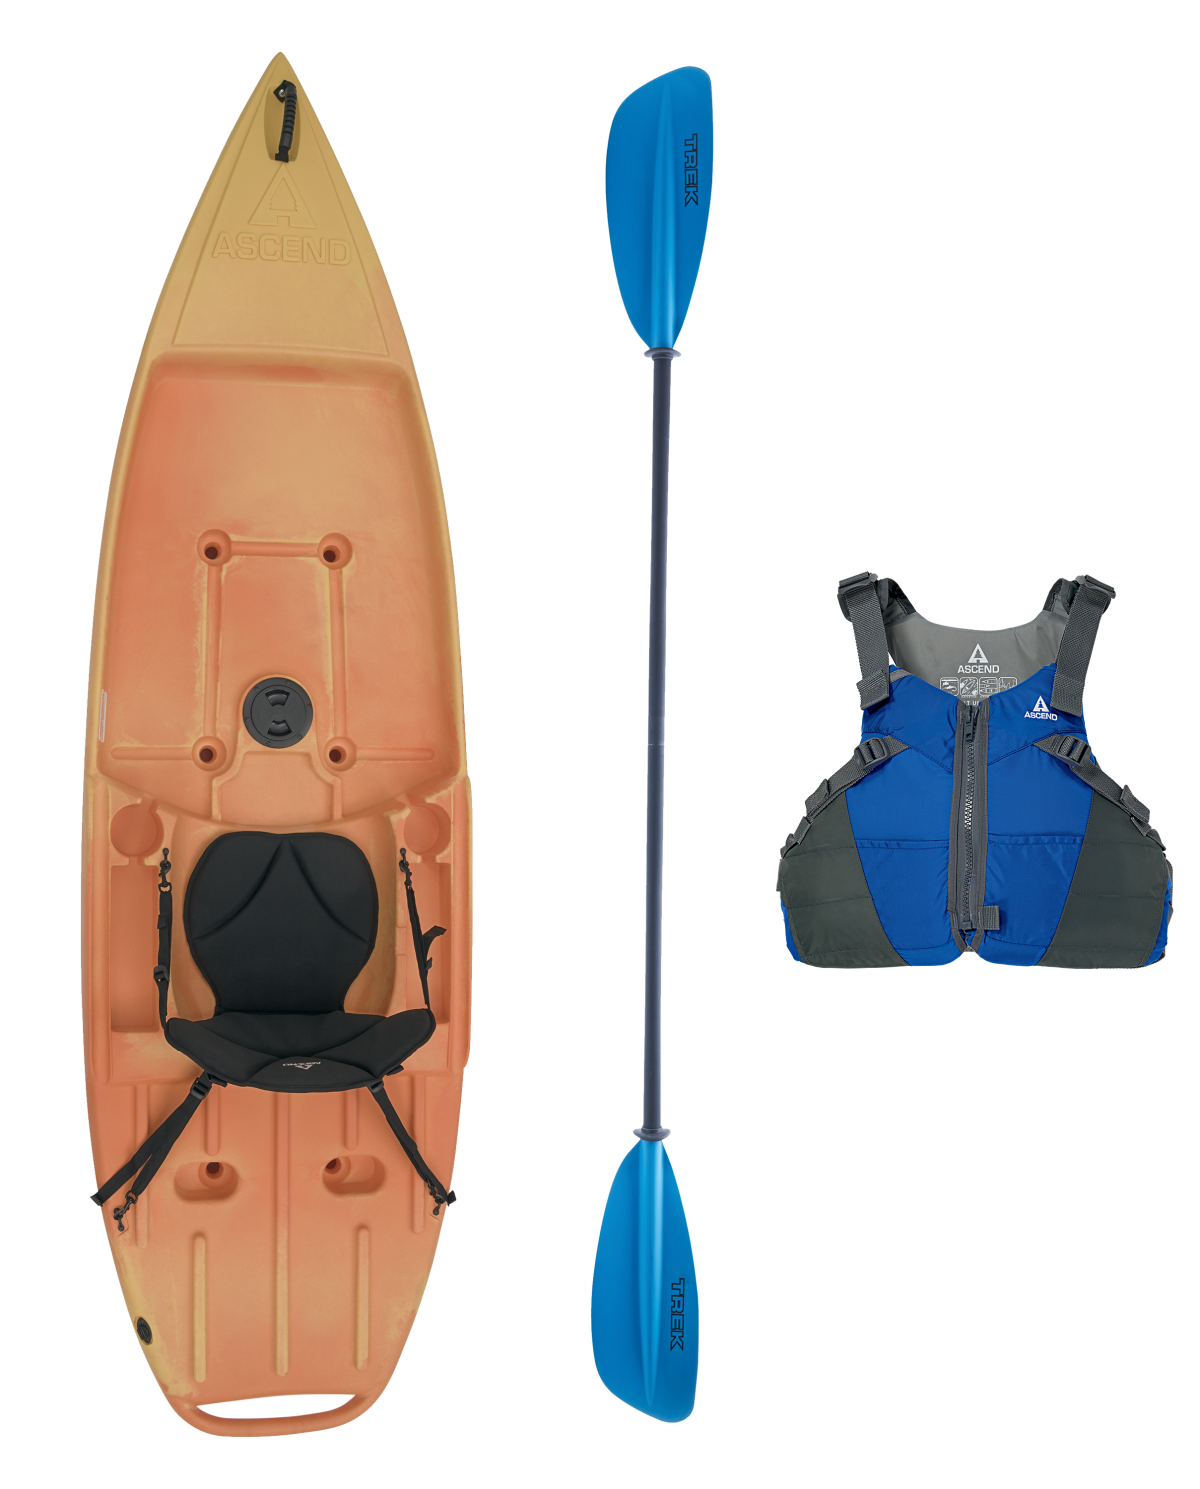 Ascend 9R Sport Yellow/Orange Sit-On-Top Kayak, Paddle, and Life Jacket Package